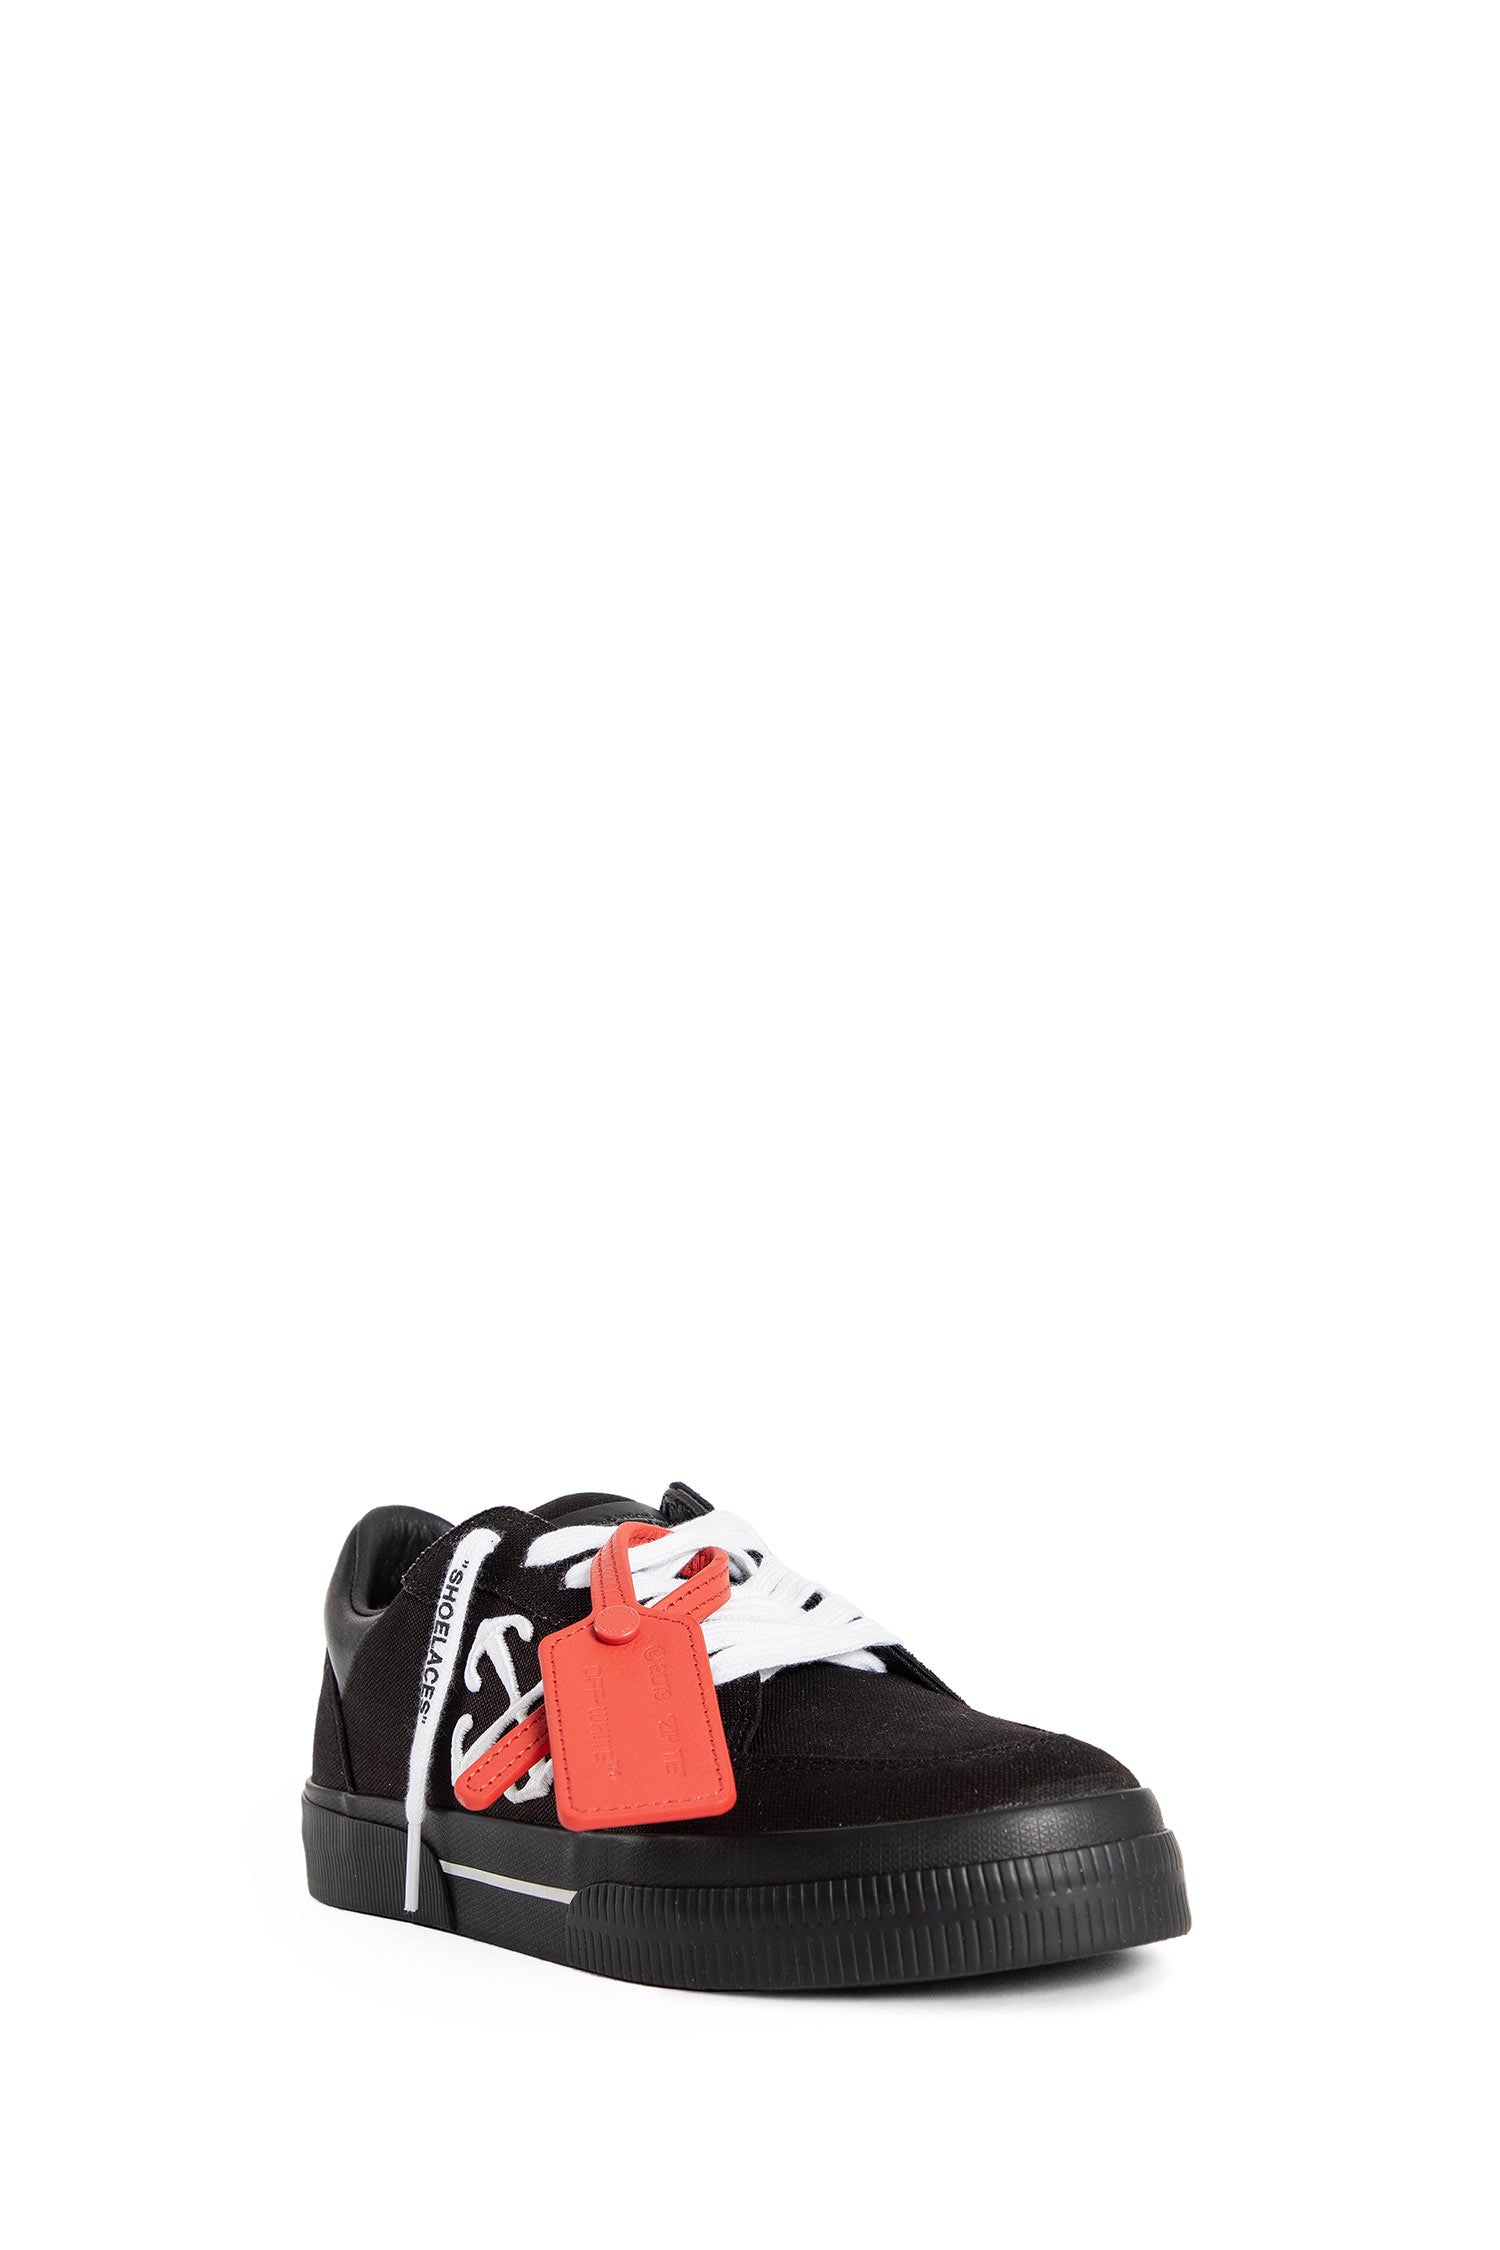 OFF-WHITE WOMAN BLACK SNEAKERS